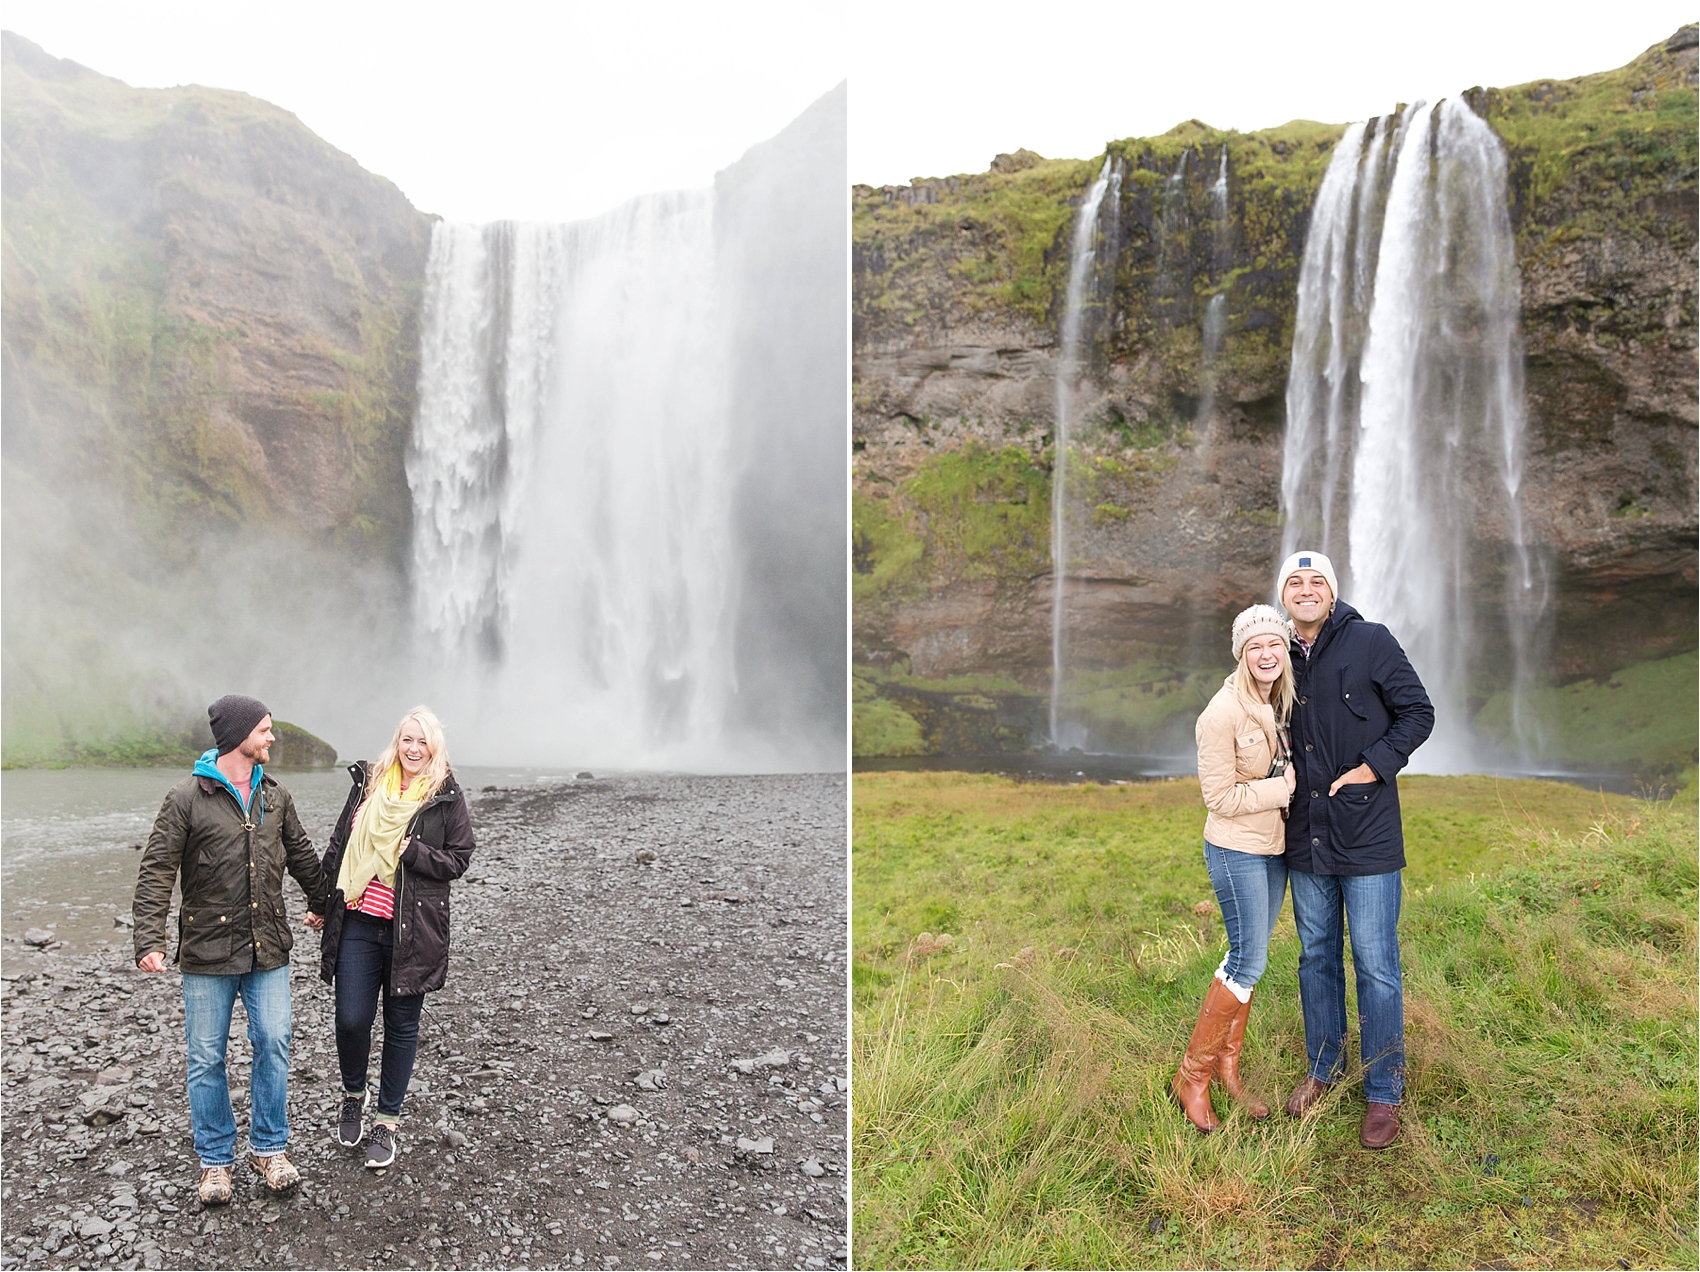 View More: http://katelynjames.pass.us/iceland-2016